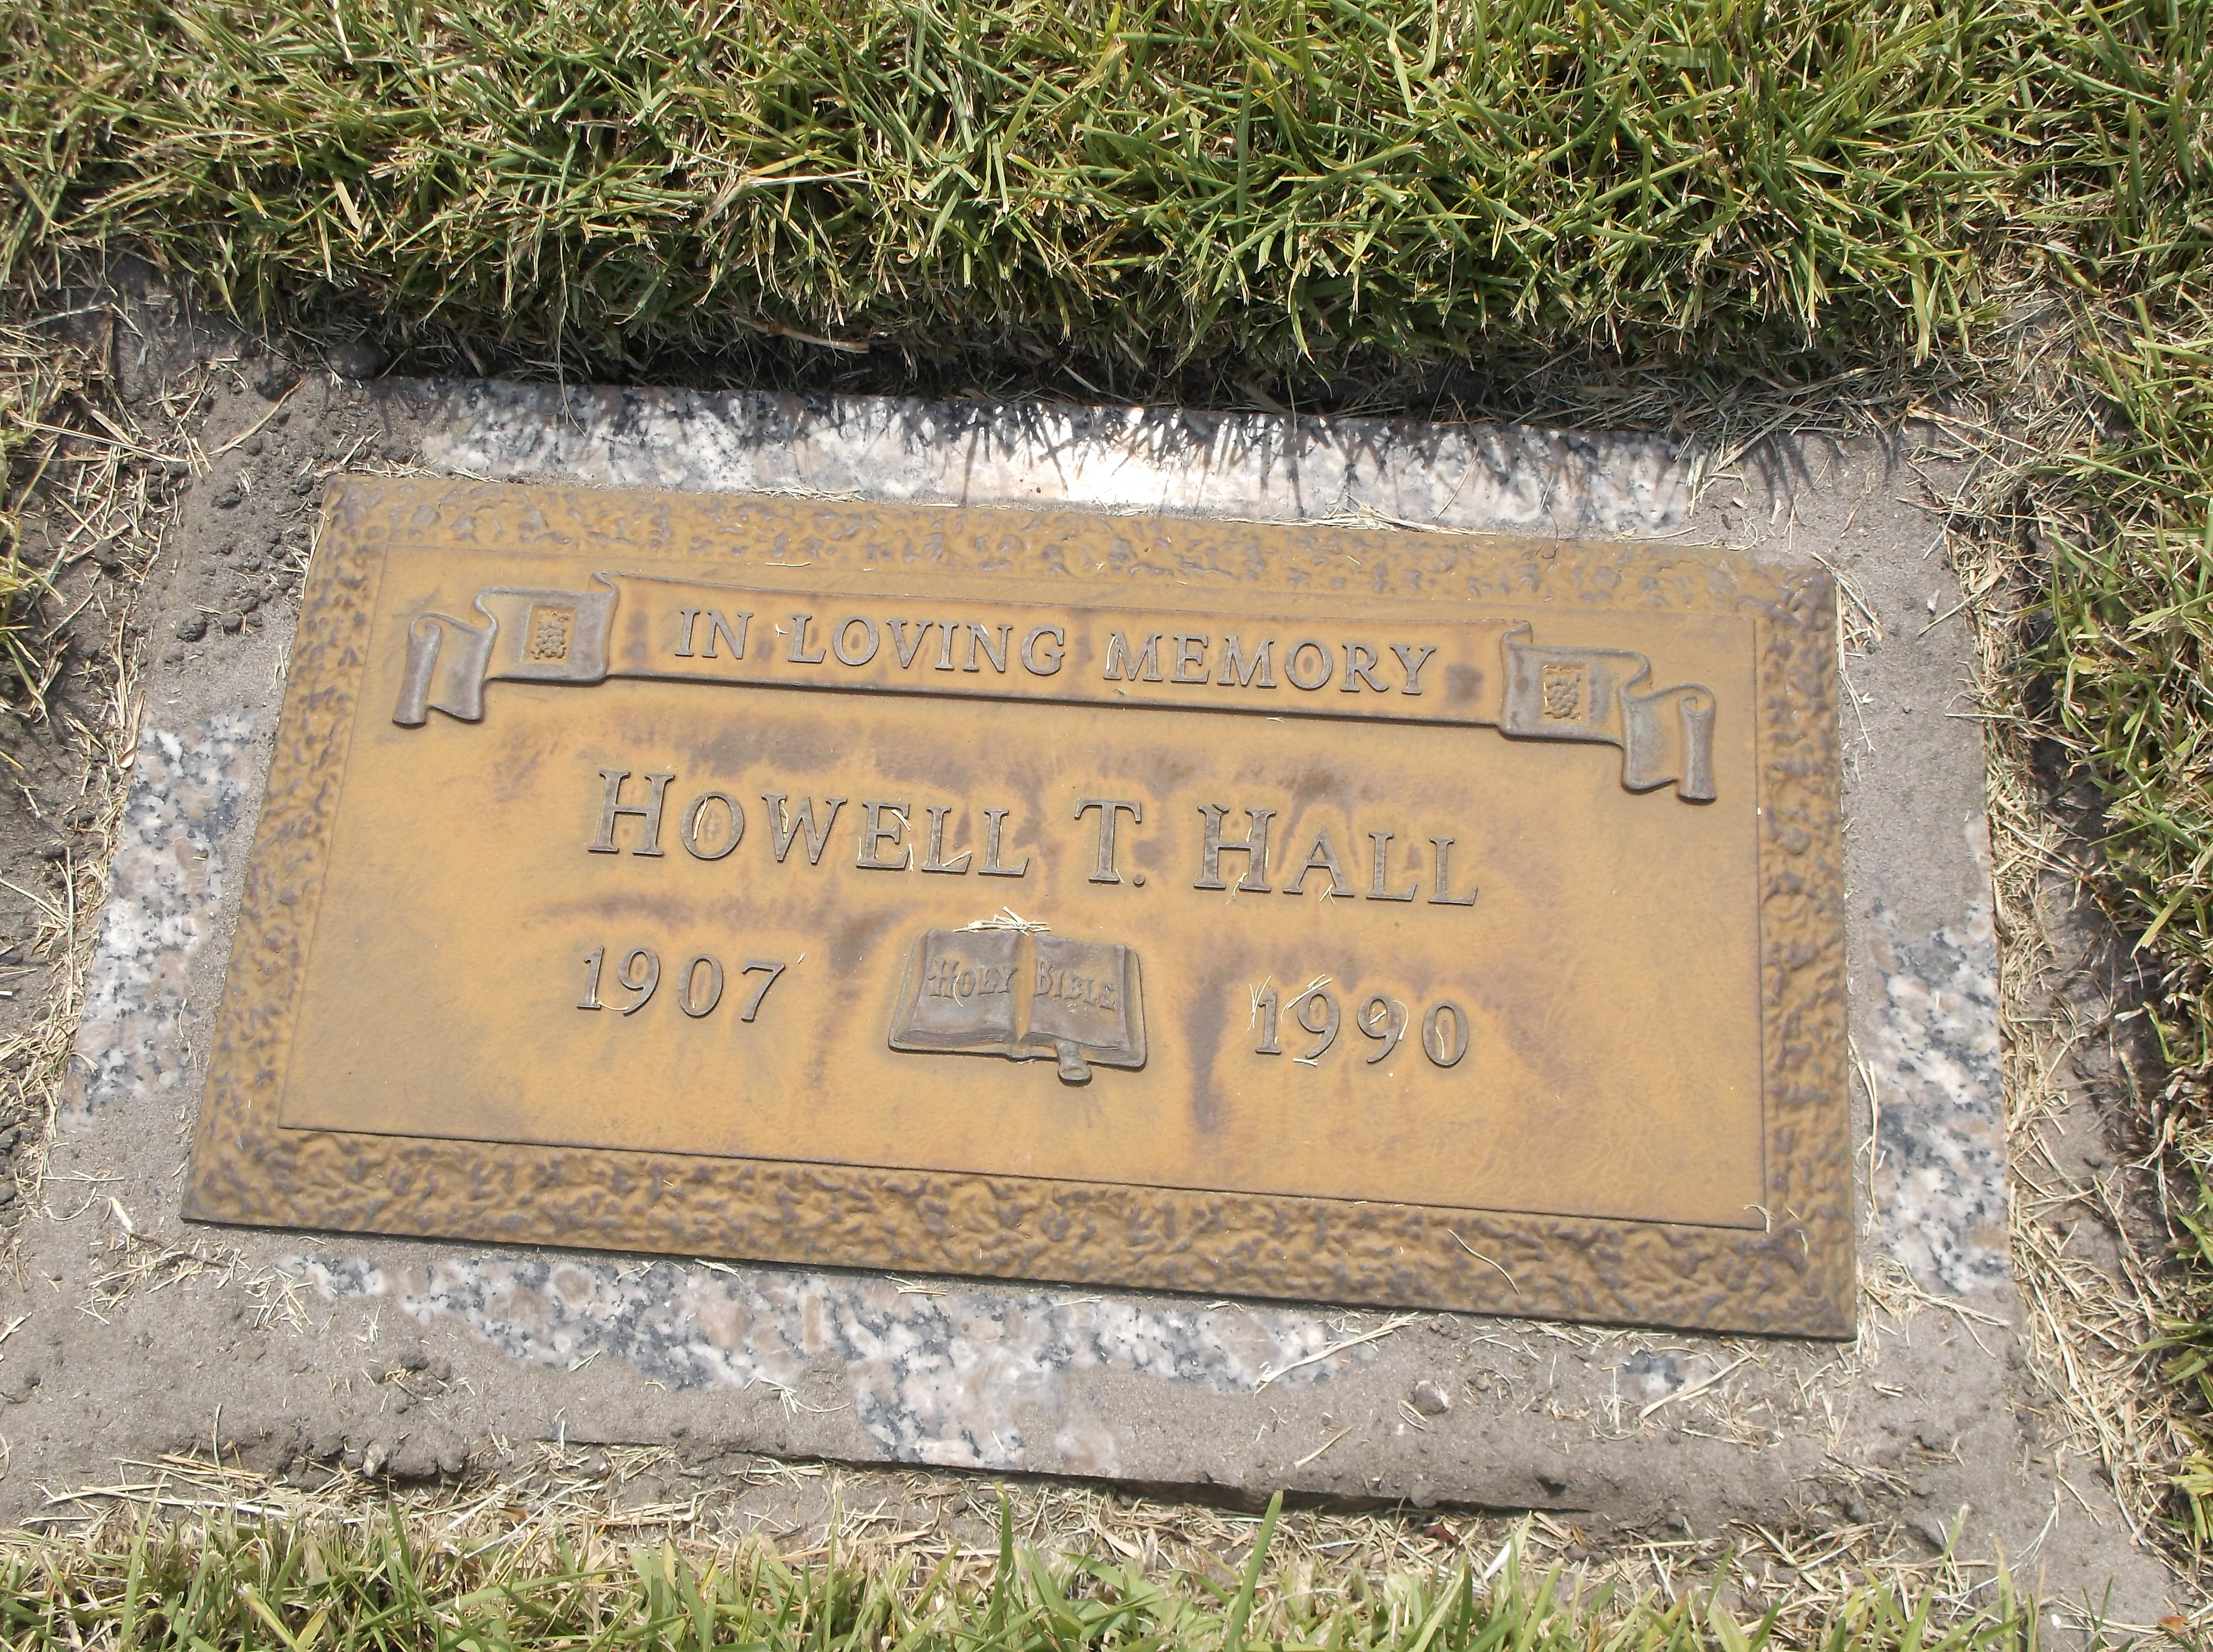 Howell T Hall